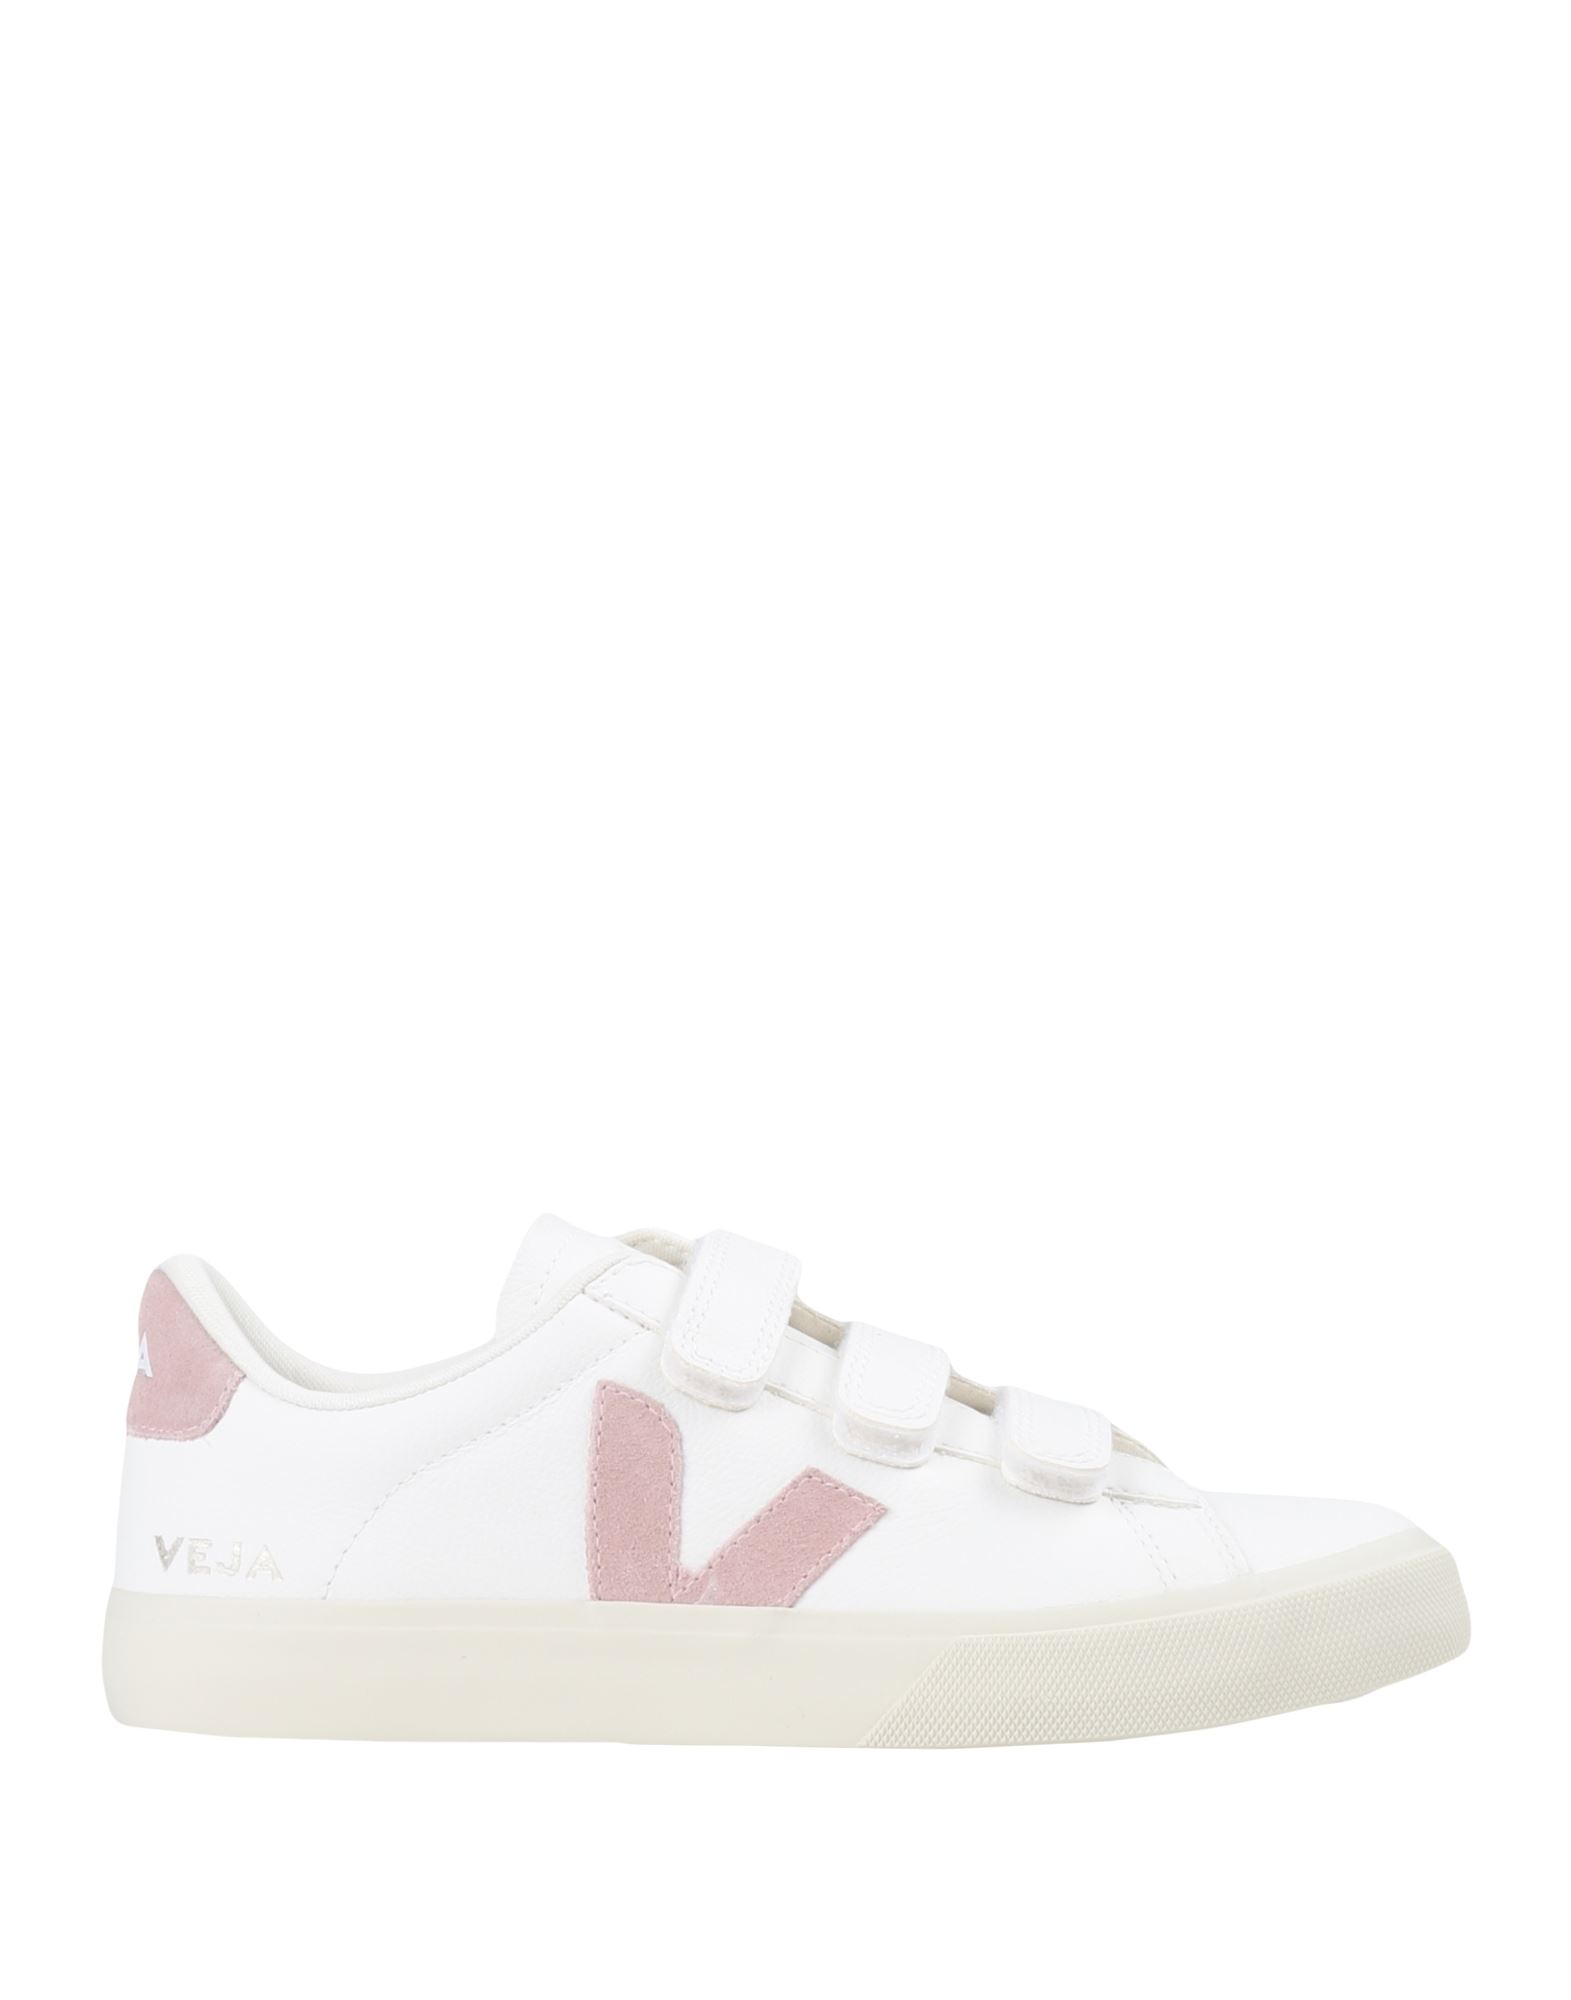 Shop Veja Recife Woman Sneakers White Size 5 Soft Leather